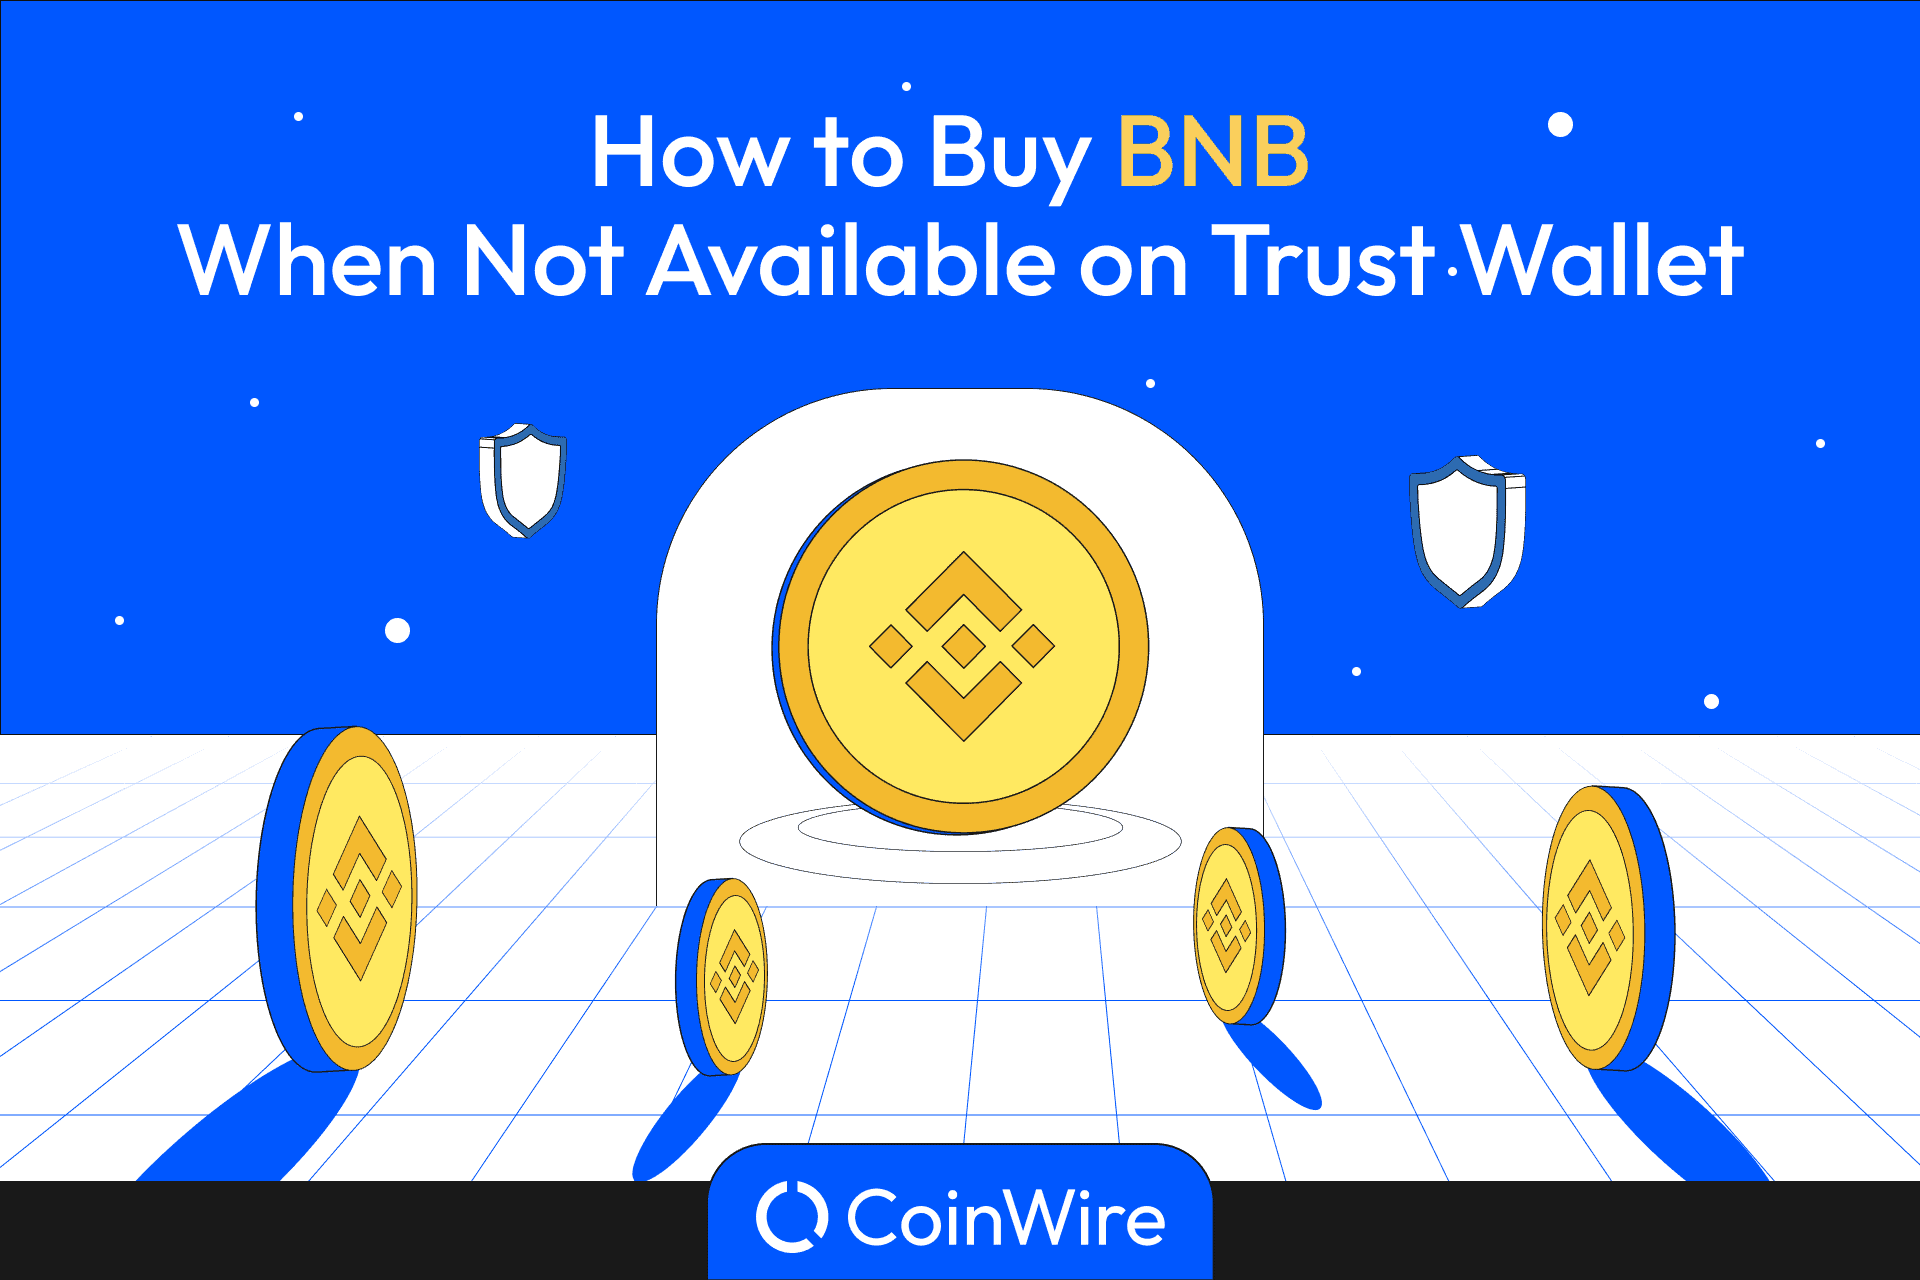 Why Is BNB Not Available On Trust Wallet?